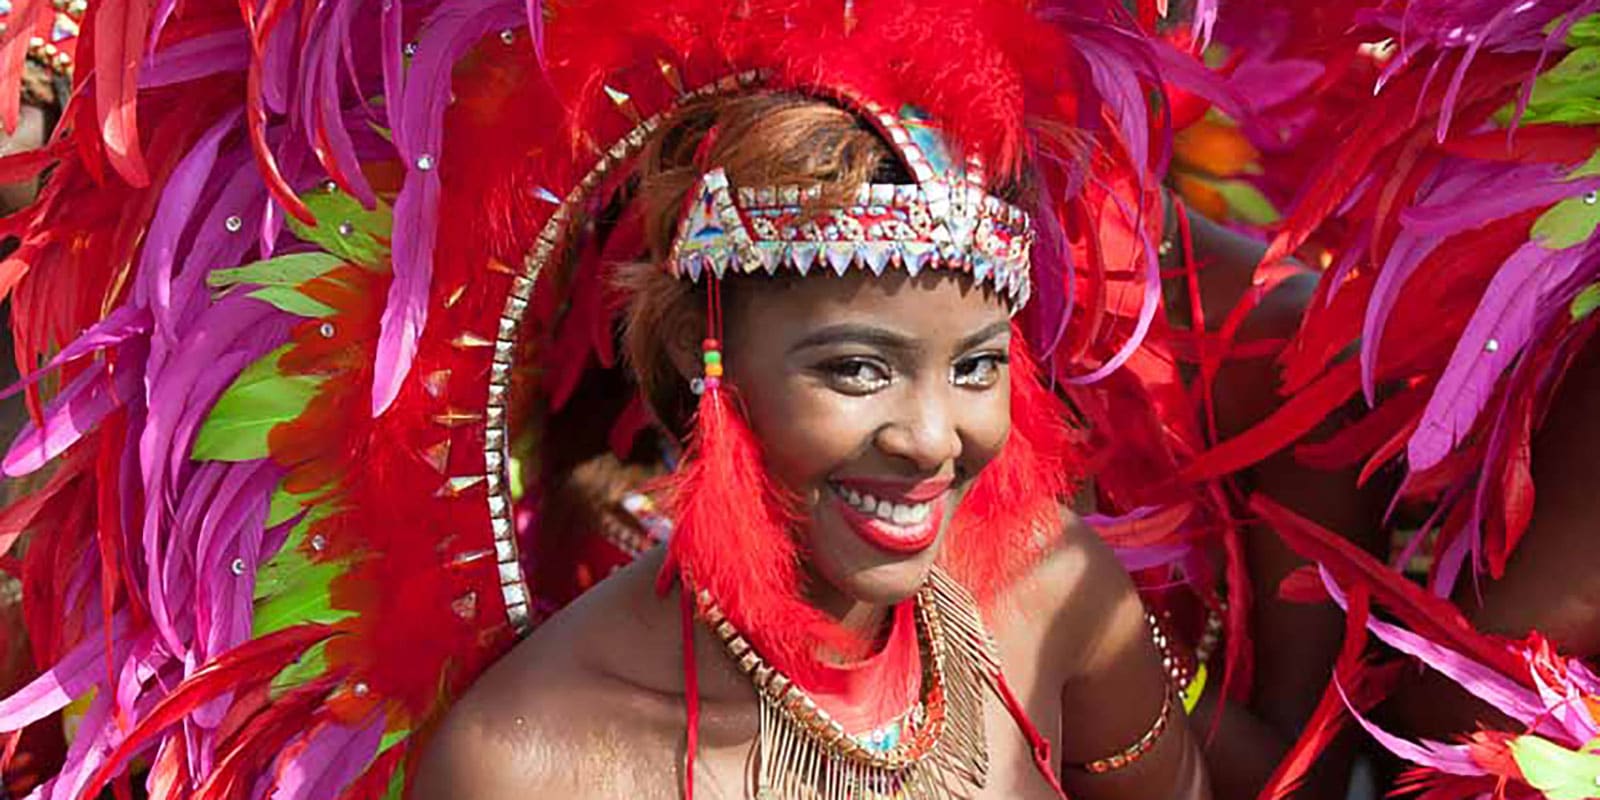 NYC's West Indian Day Parade Labor Day Weekend Carnival (Keith Widyolar/New York Latin Culture Magazine)